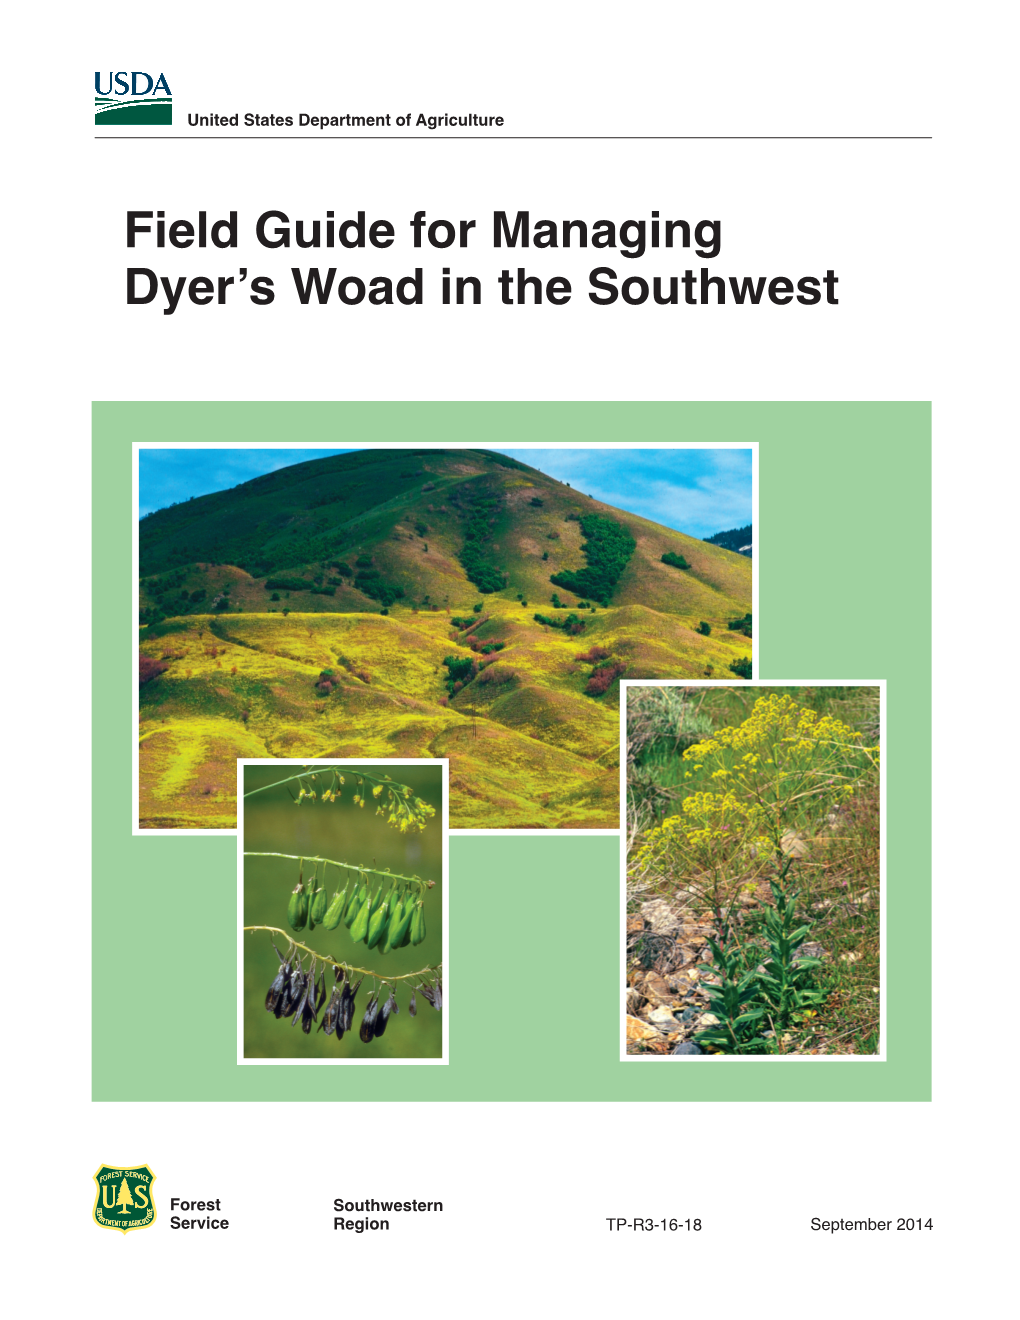 Field Guide for Managing Dyer's Woad in the Southwest